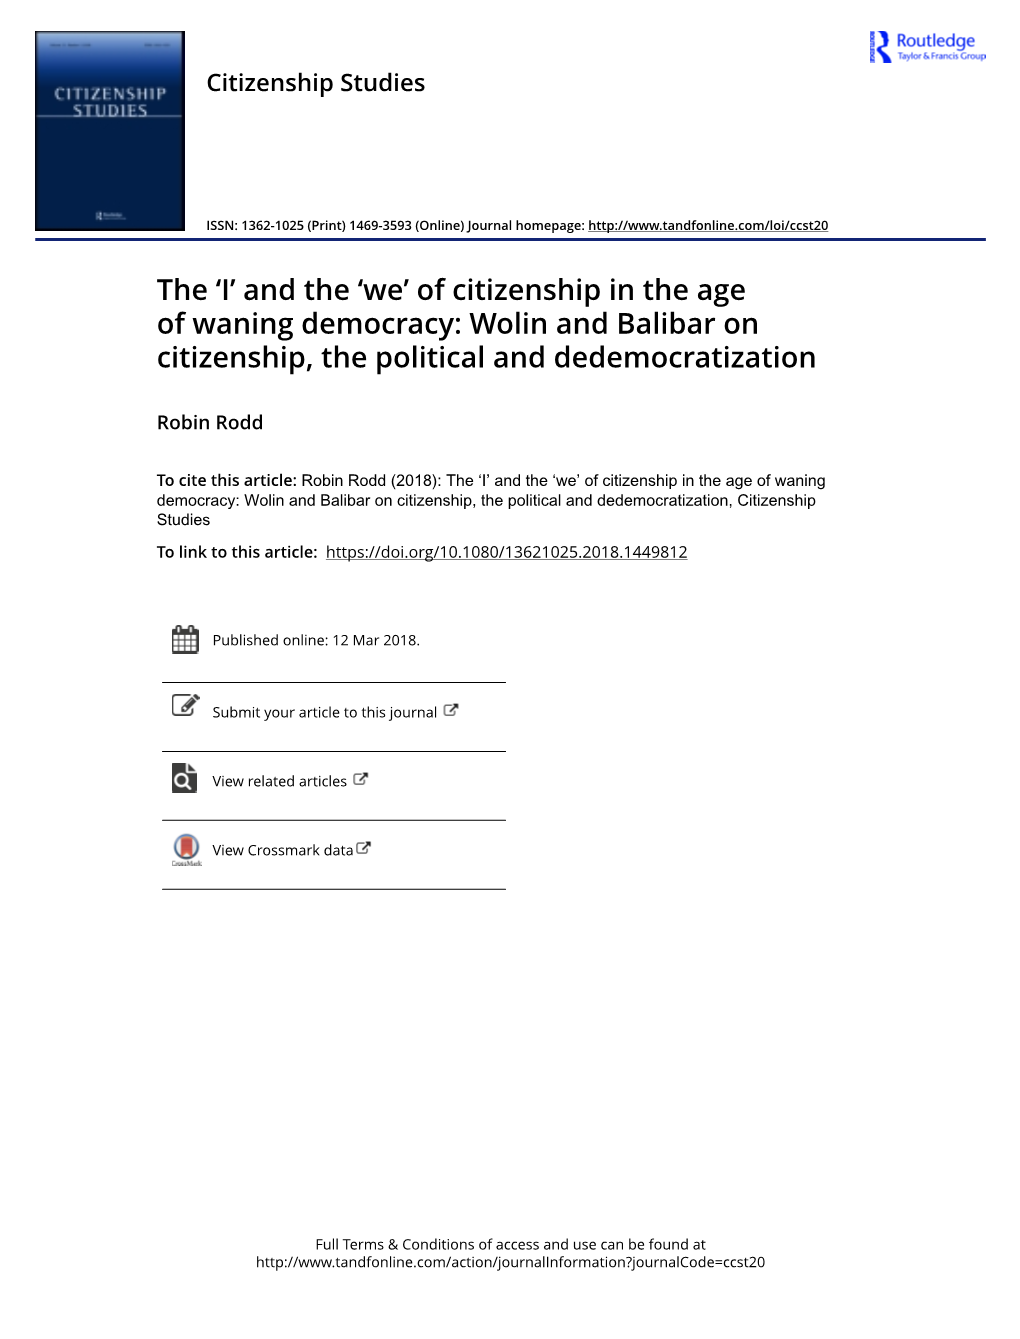 Of Citizenship in the Age of Waning Democracy: Wolin and Balibar on Citizenship, the Political and Dedemocratization